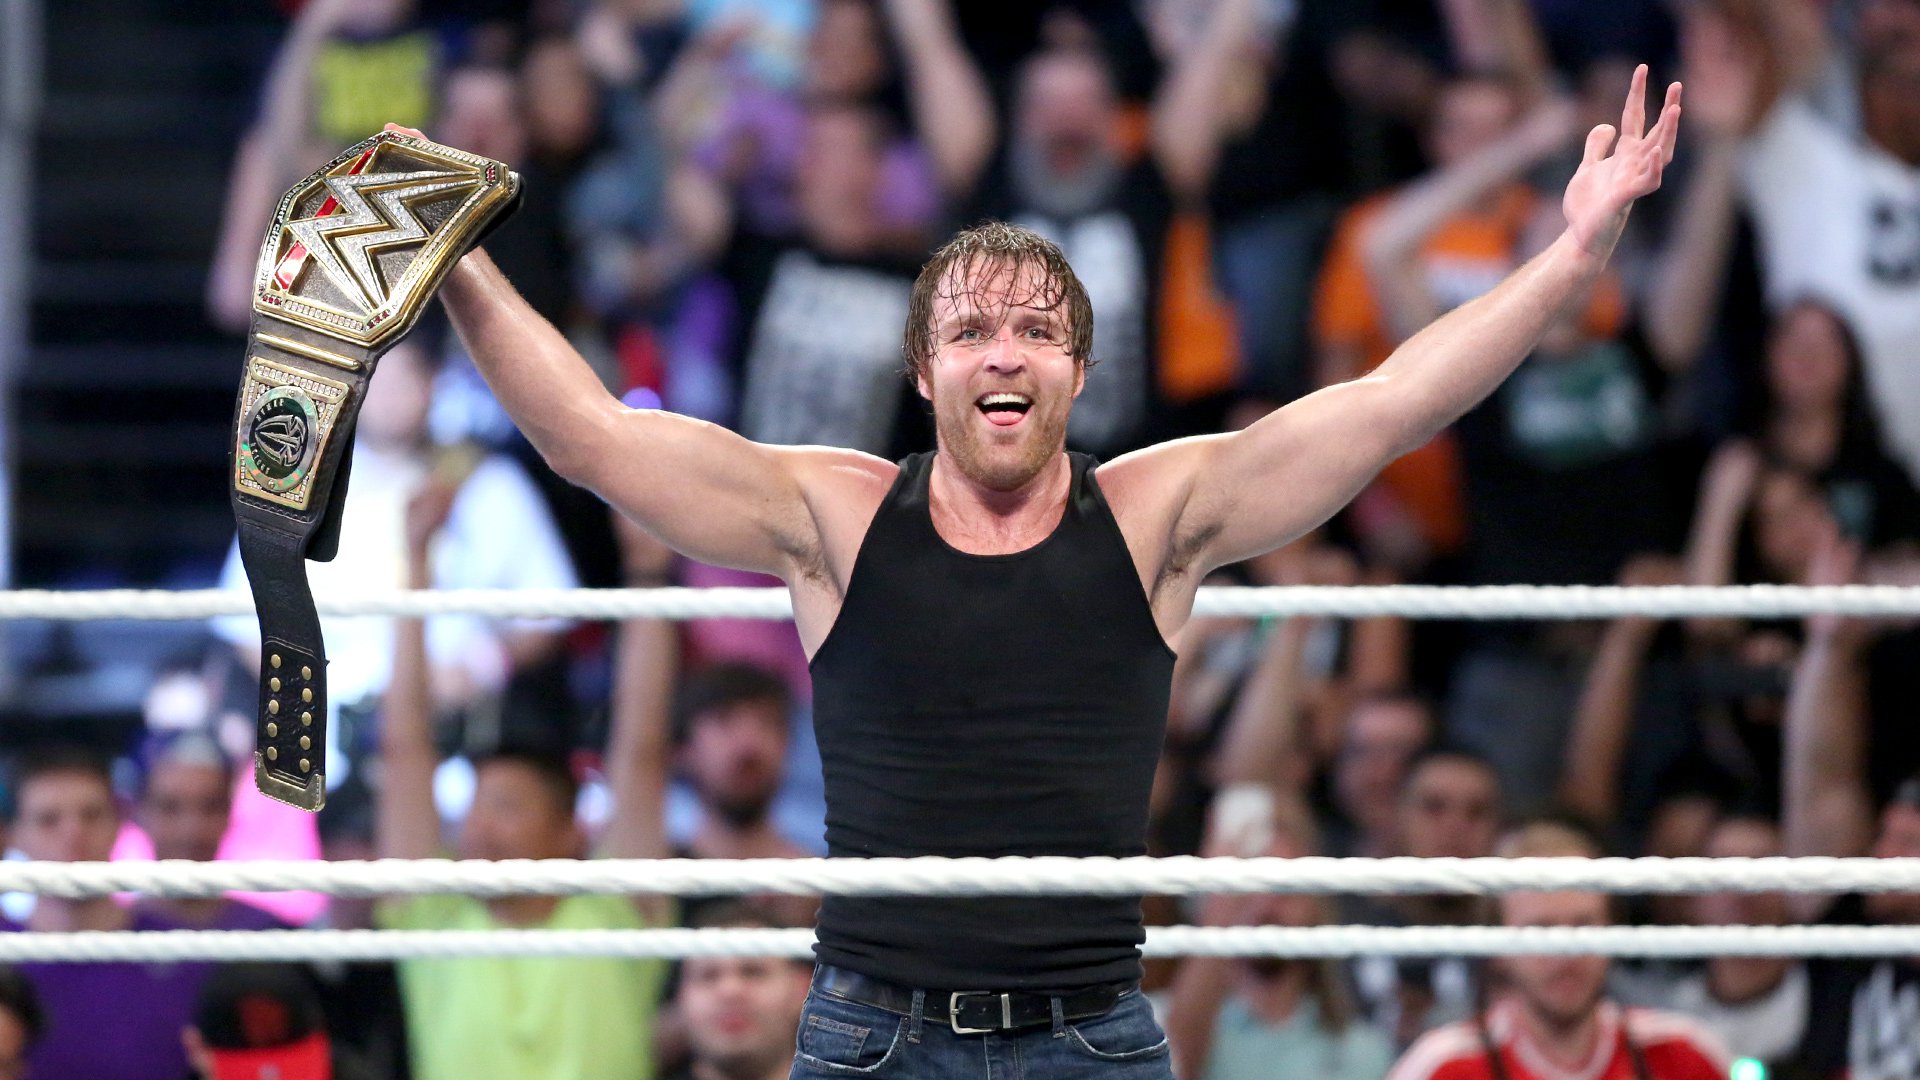 Jon Moxley says debuting in AEW "totally trumps" winning the WWE Championship